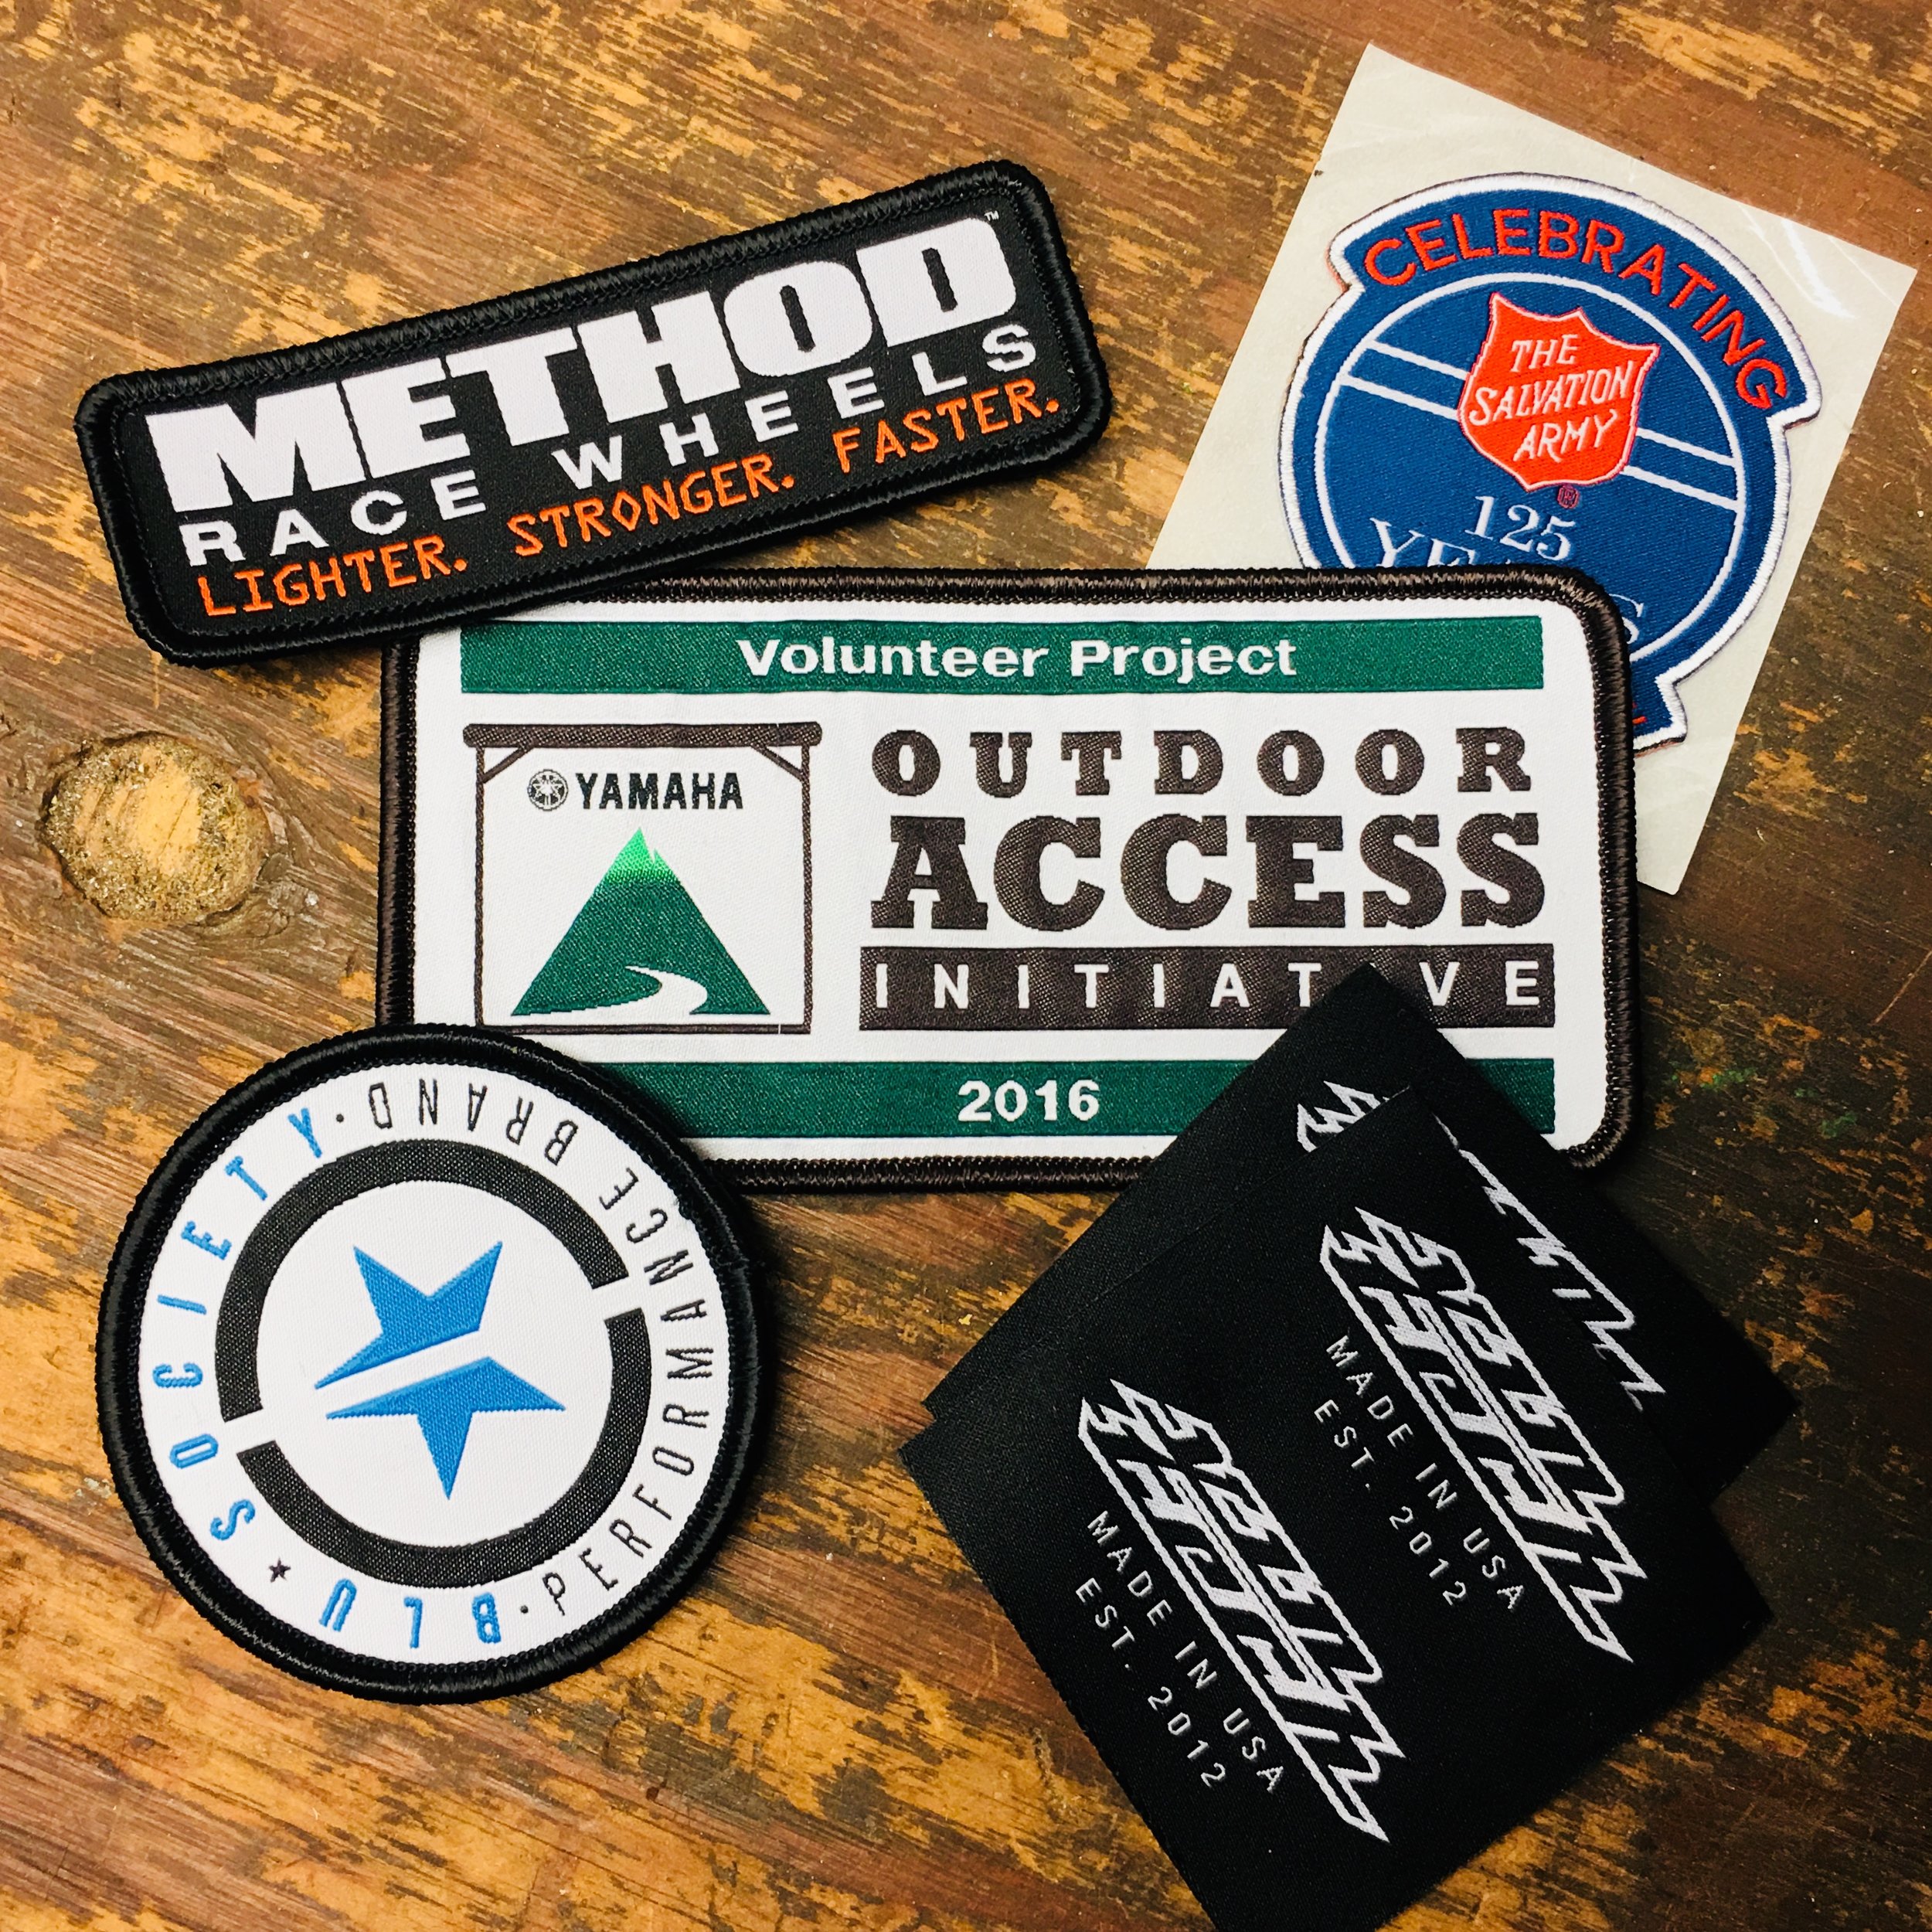 Legitimize Your Project With Some Badge Swag